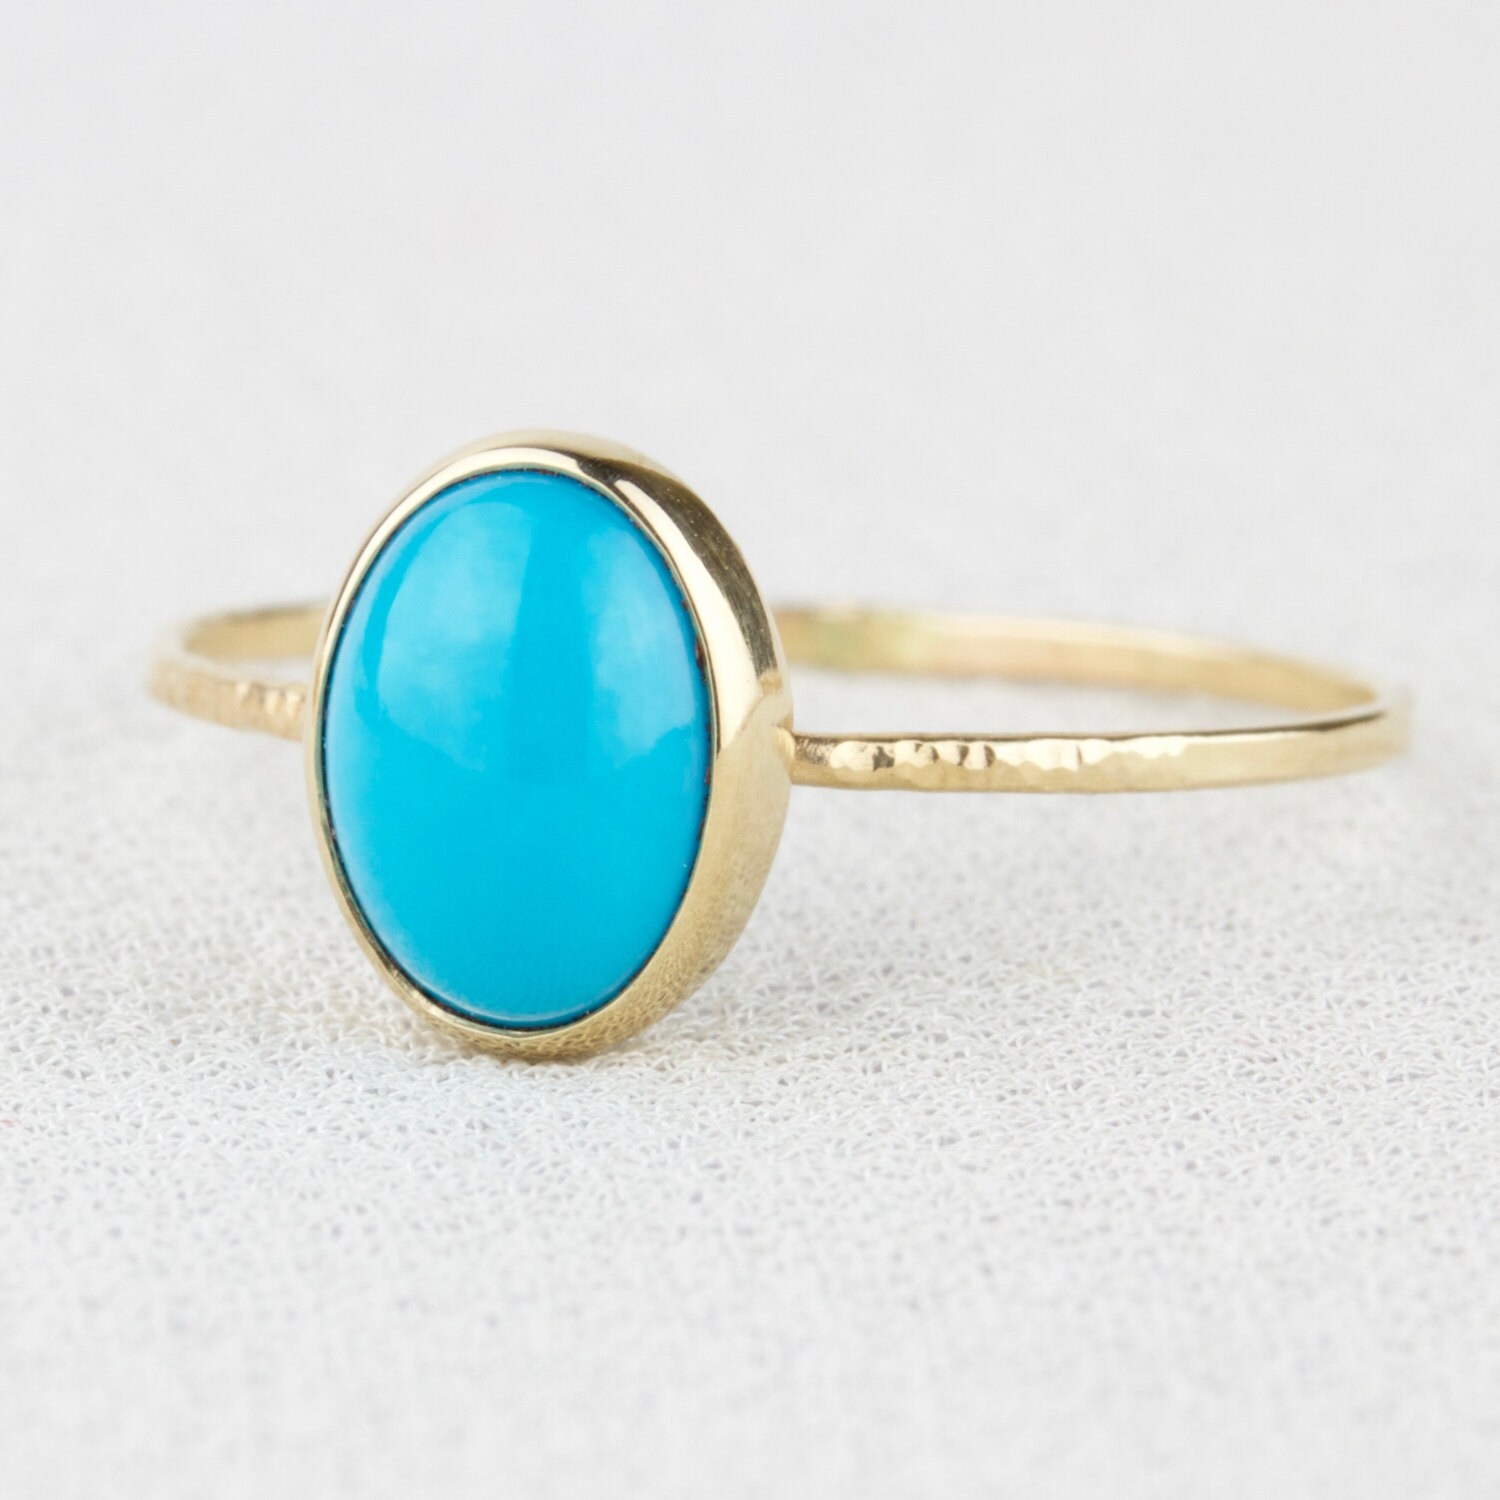 Natural Oval Bluebird Turquoise Ring SOLID 14k Gold | Etsy